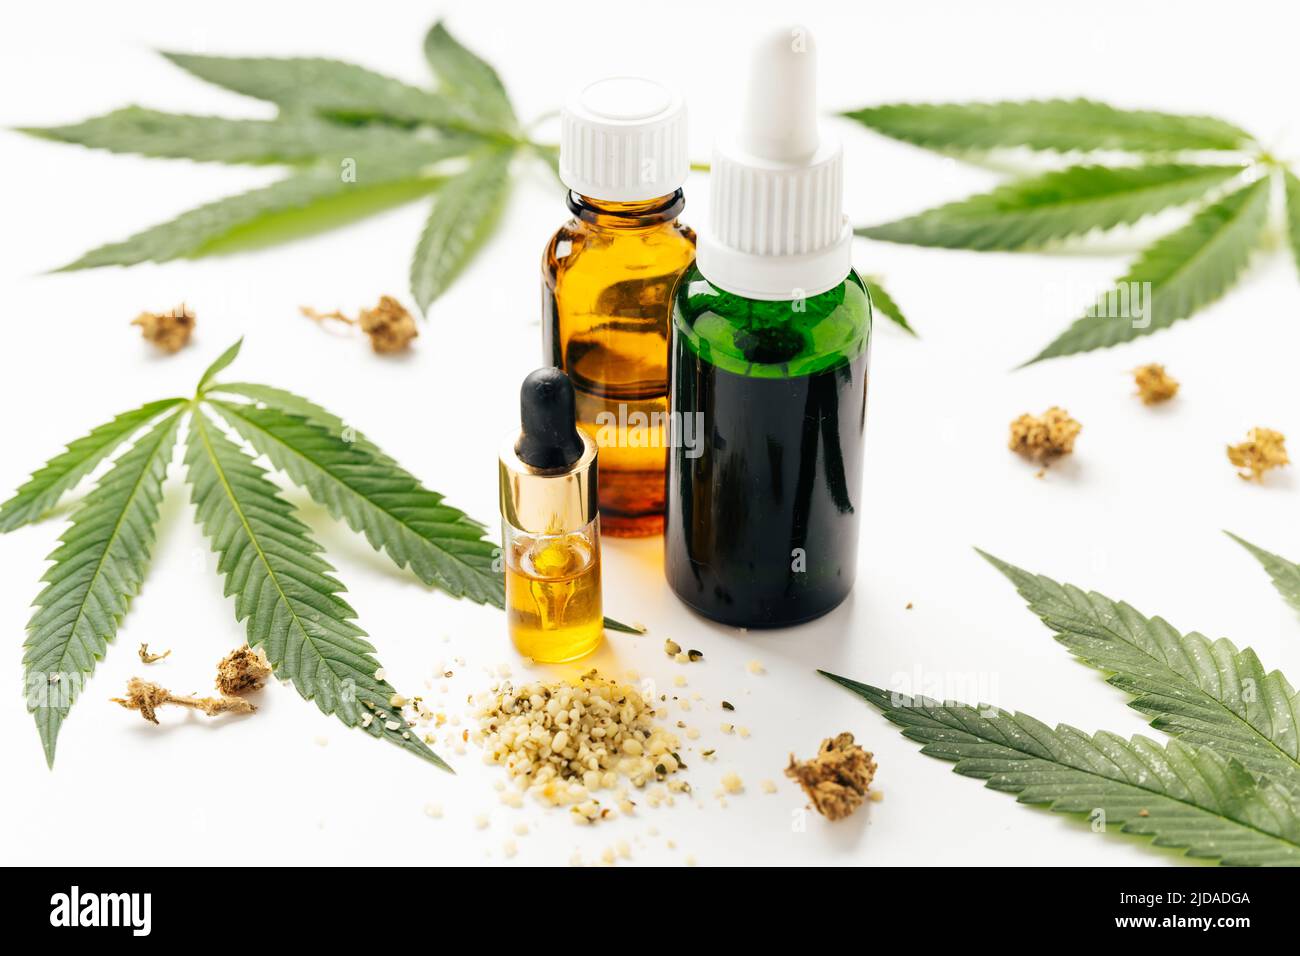 Cannabis oil, hemp leaves, dry flowers on white background. Natural cosmetics. Omega fats. Increasingly legal and medical use of marijuana Stock Photo